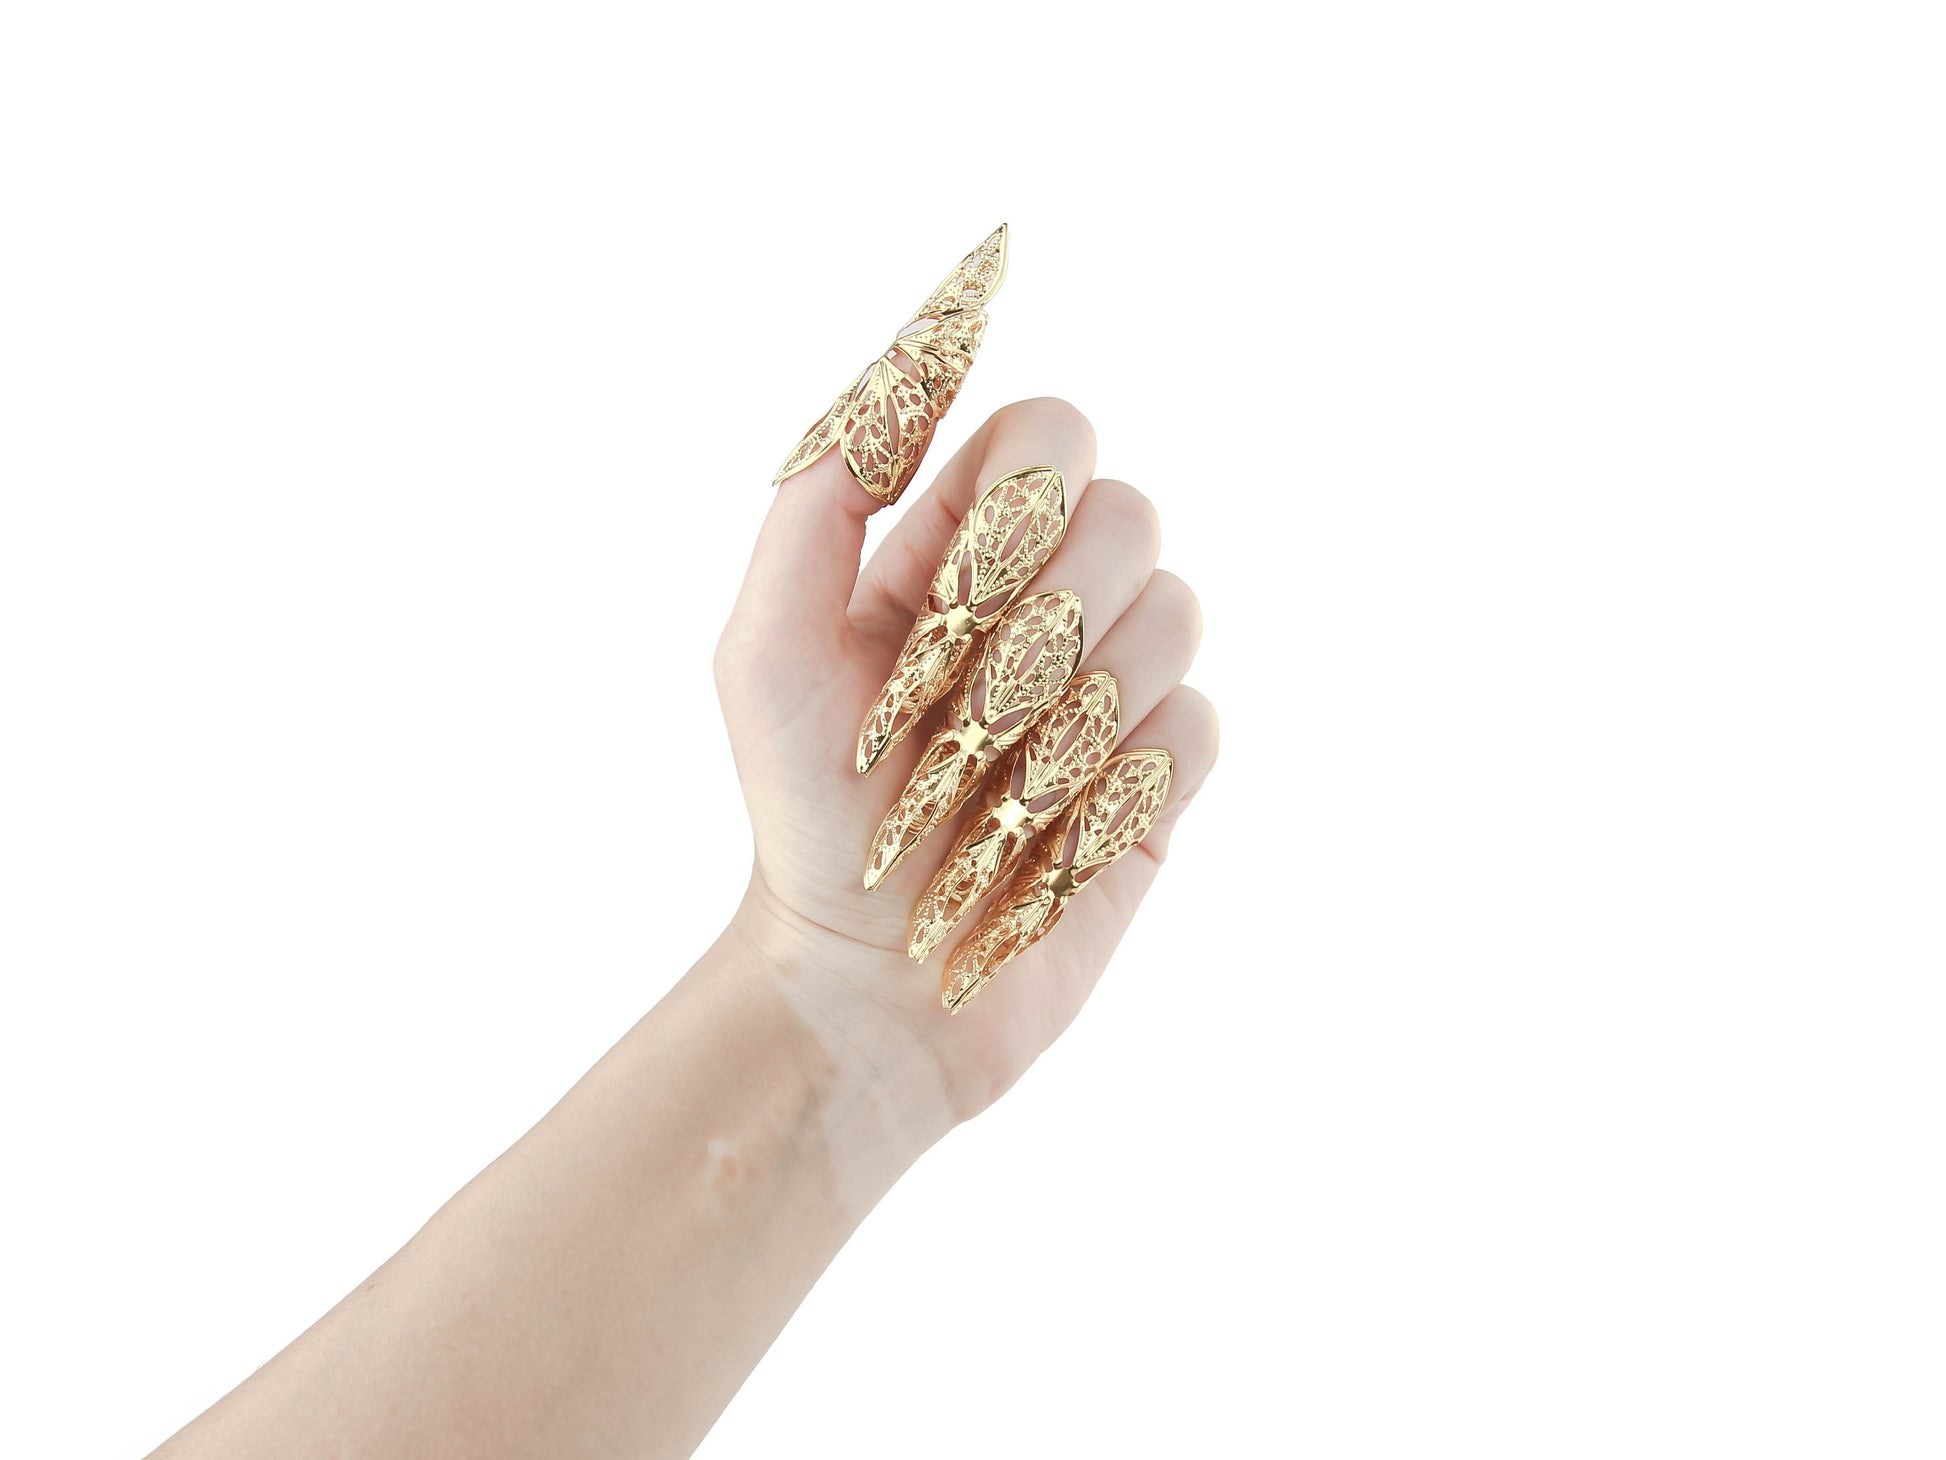 Elegant long nail claws by Myril Jewels exude a neo-goth charm, perfect for those with a penchant for dark, avant-garde accessories. Ideal for Halloween, these gold claw-like pieces are also suited for punk and whimsigoth aesthetics, making a bold statement at raves and festivals, or as a striking gift for the goth girlfriend.